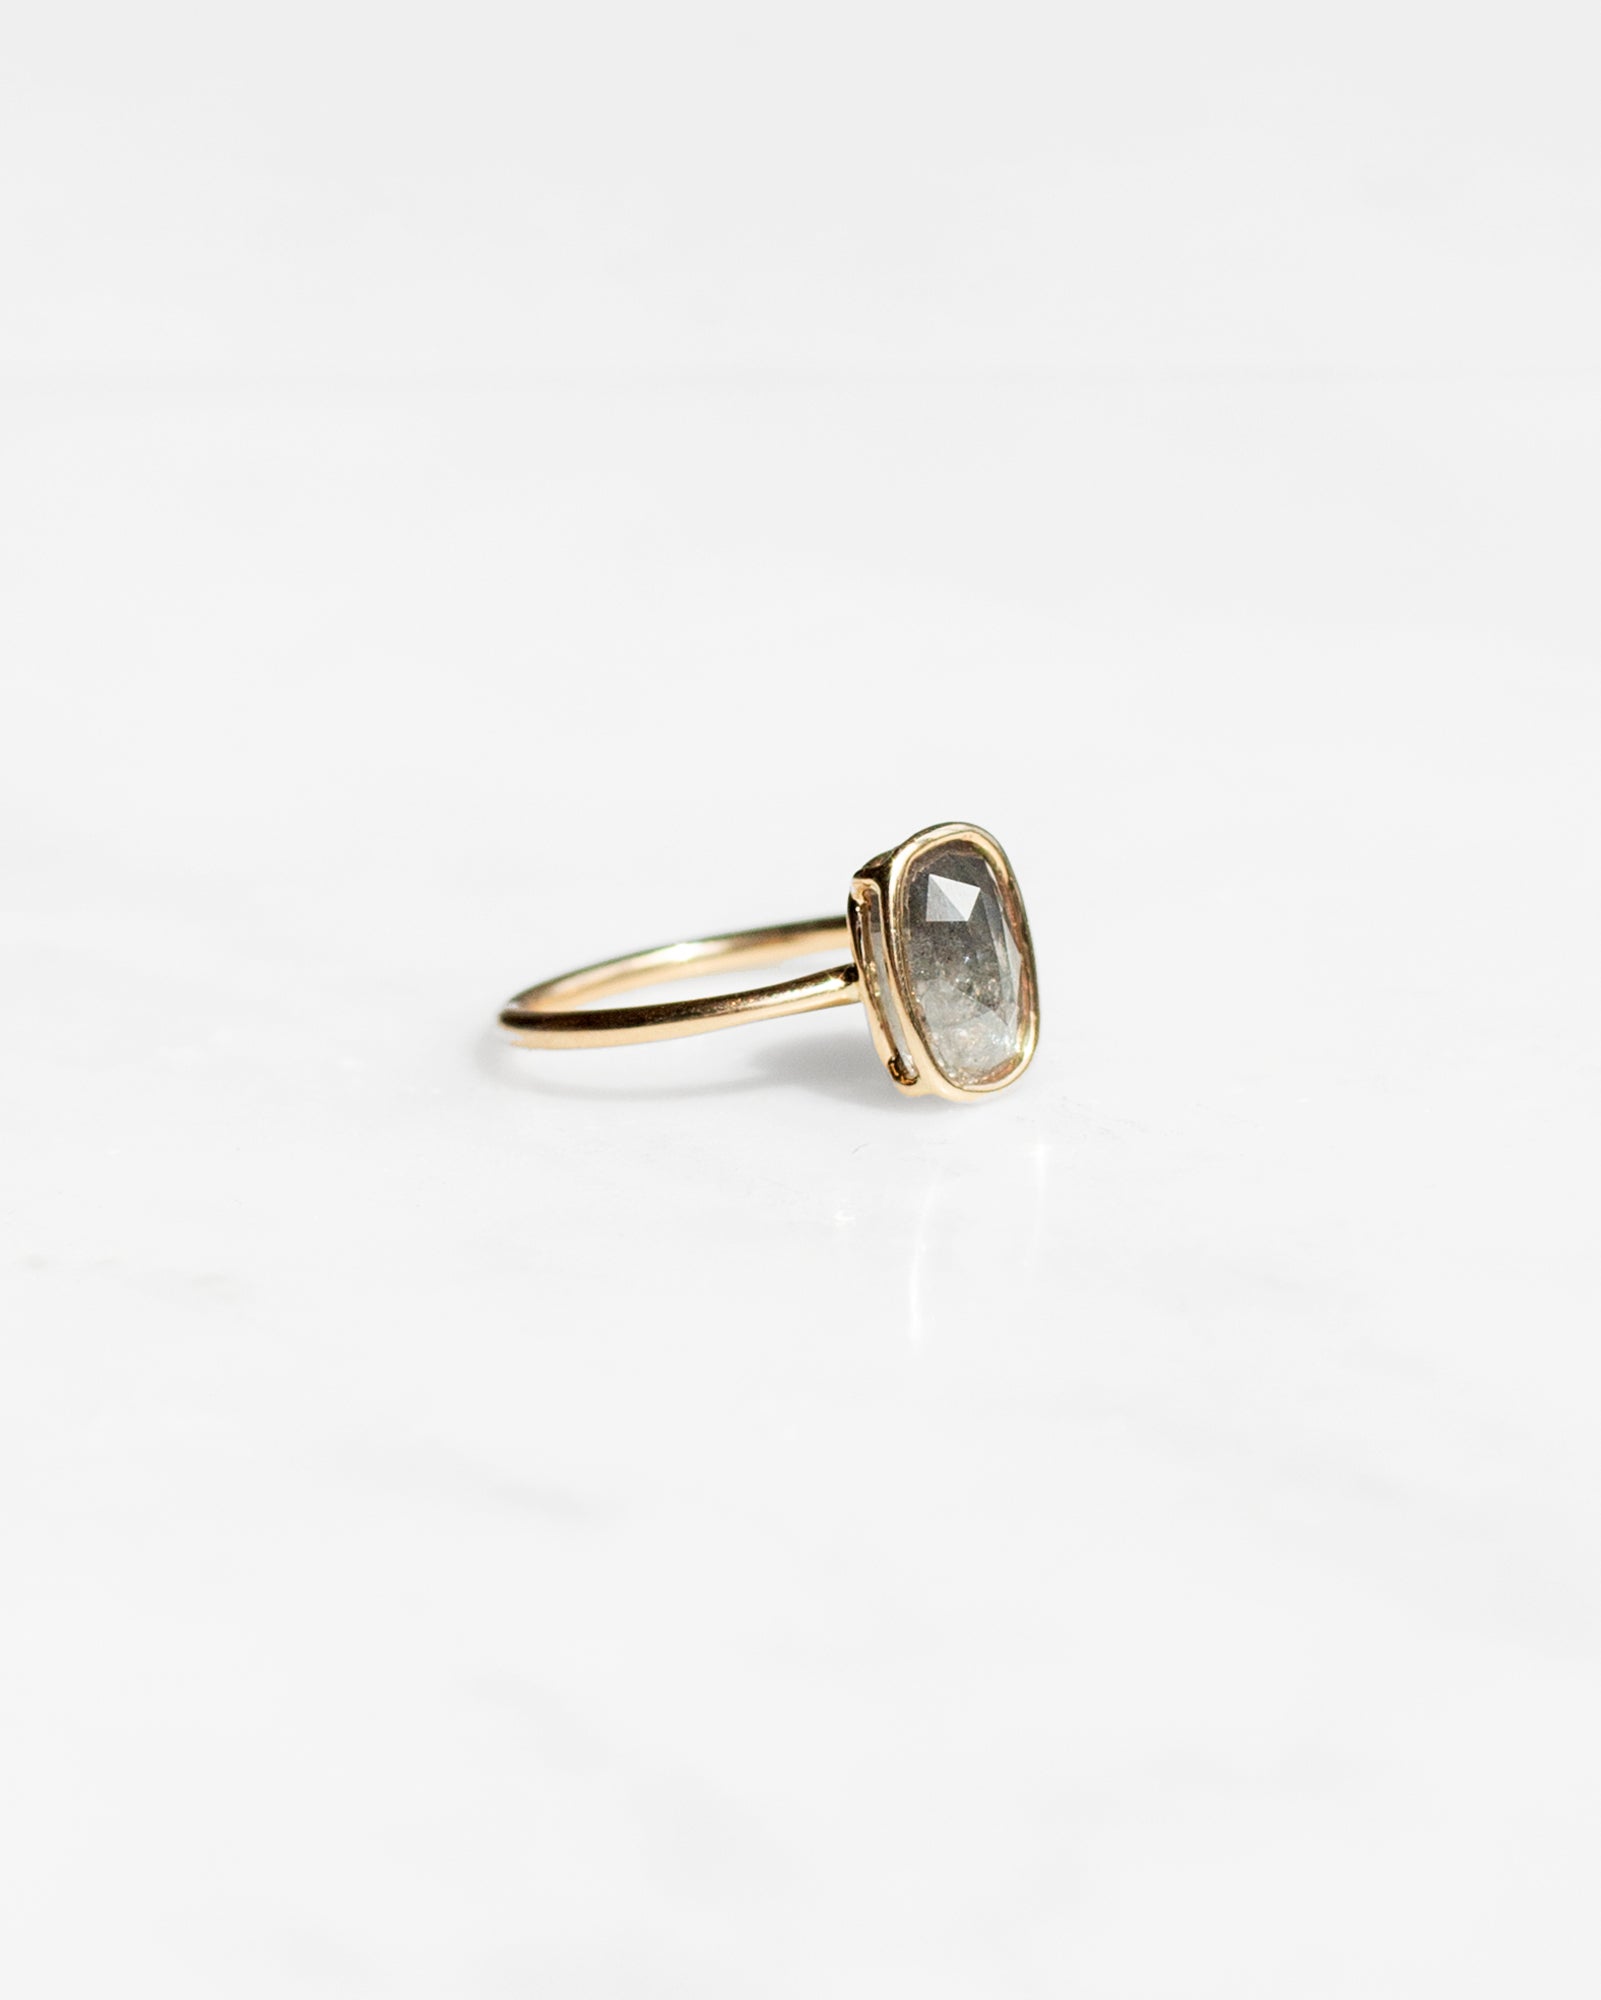 Mineral Diamond Floating Ring - Cloudy Salt and Pepper